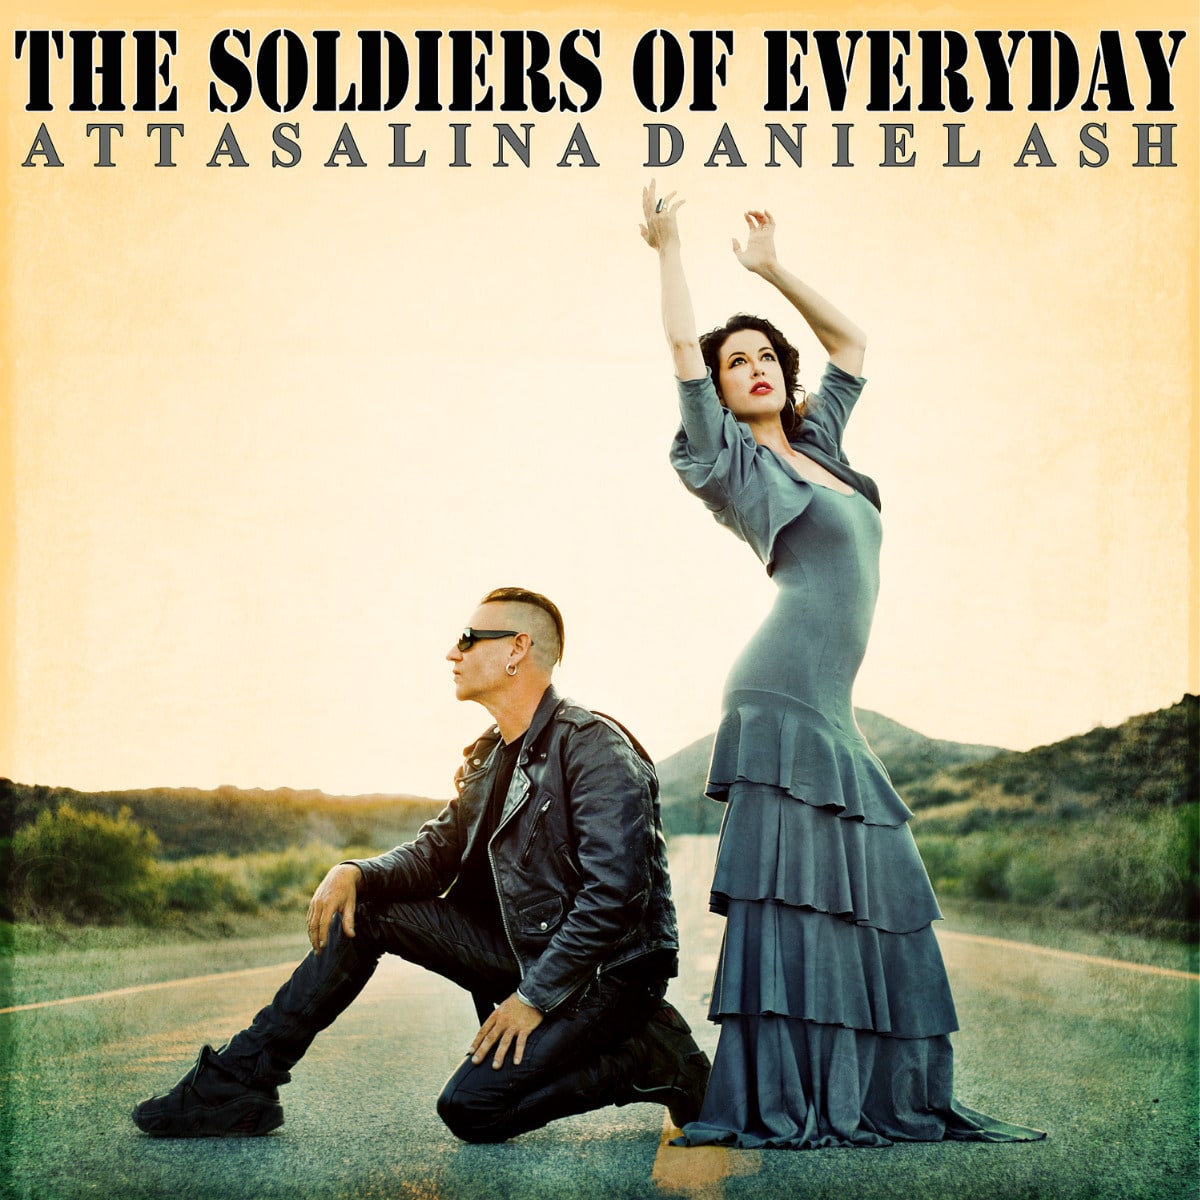 The Soldiers of Everyday by Daniel Ash & Attasalina